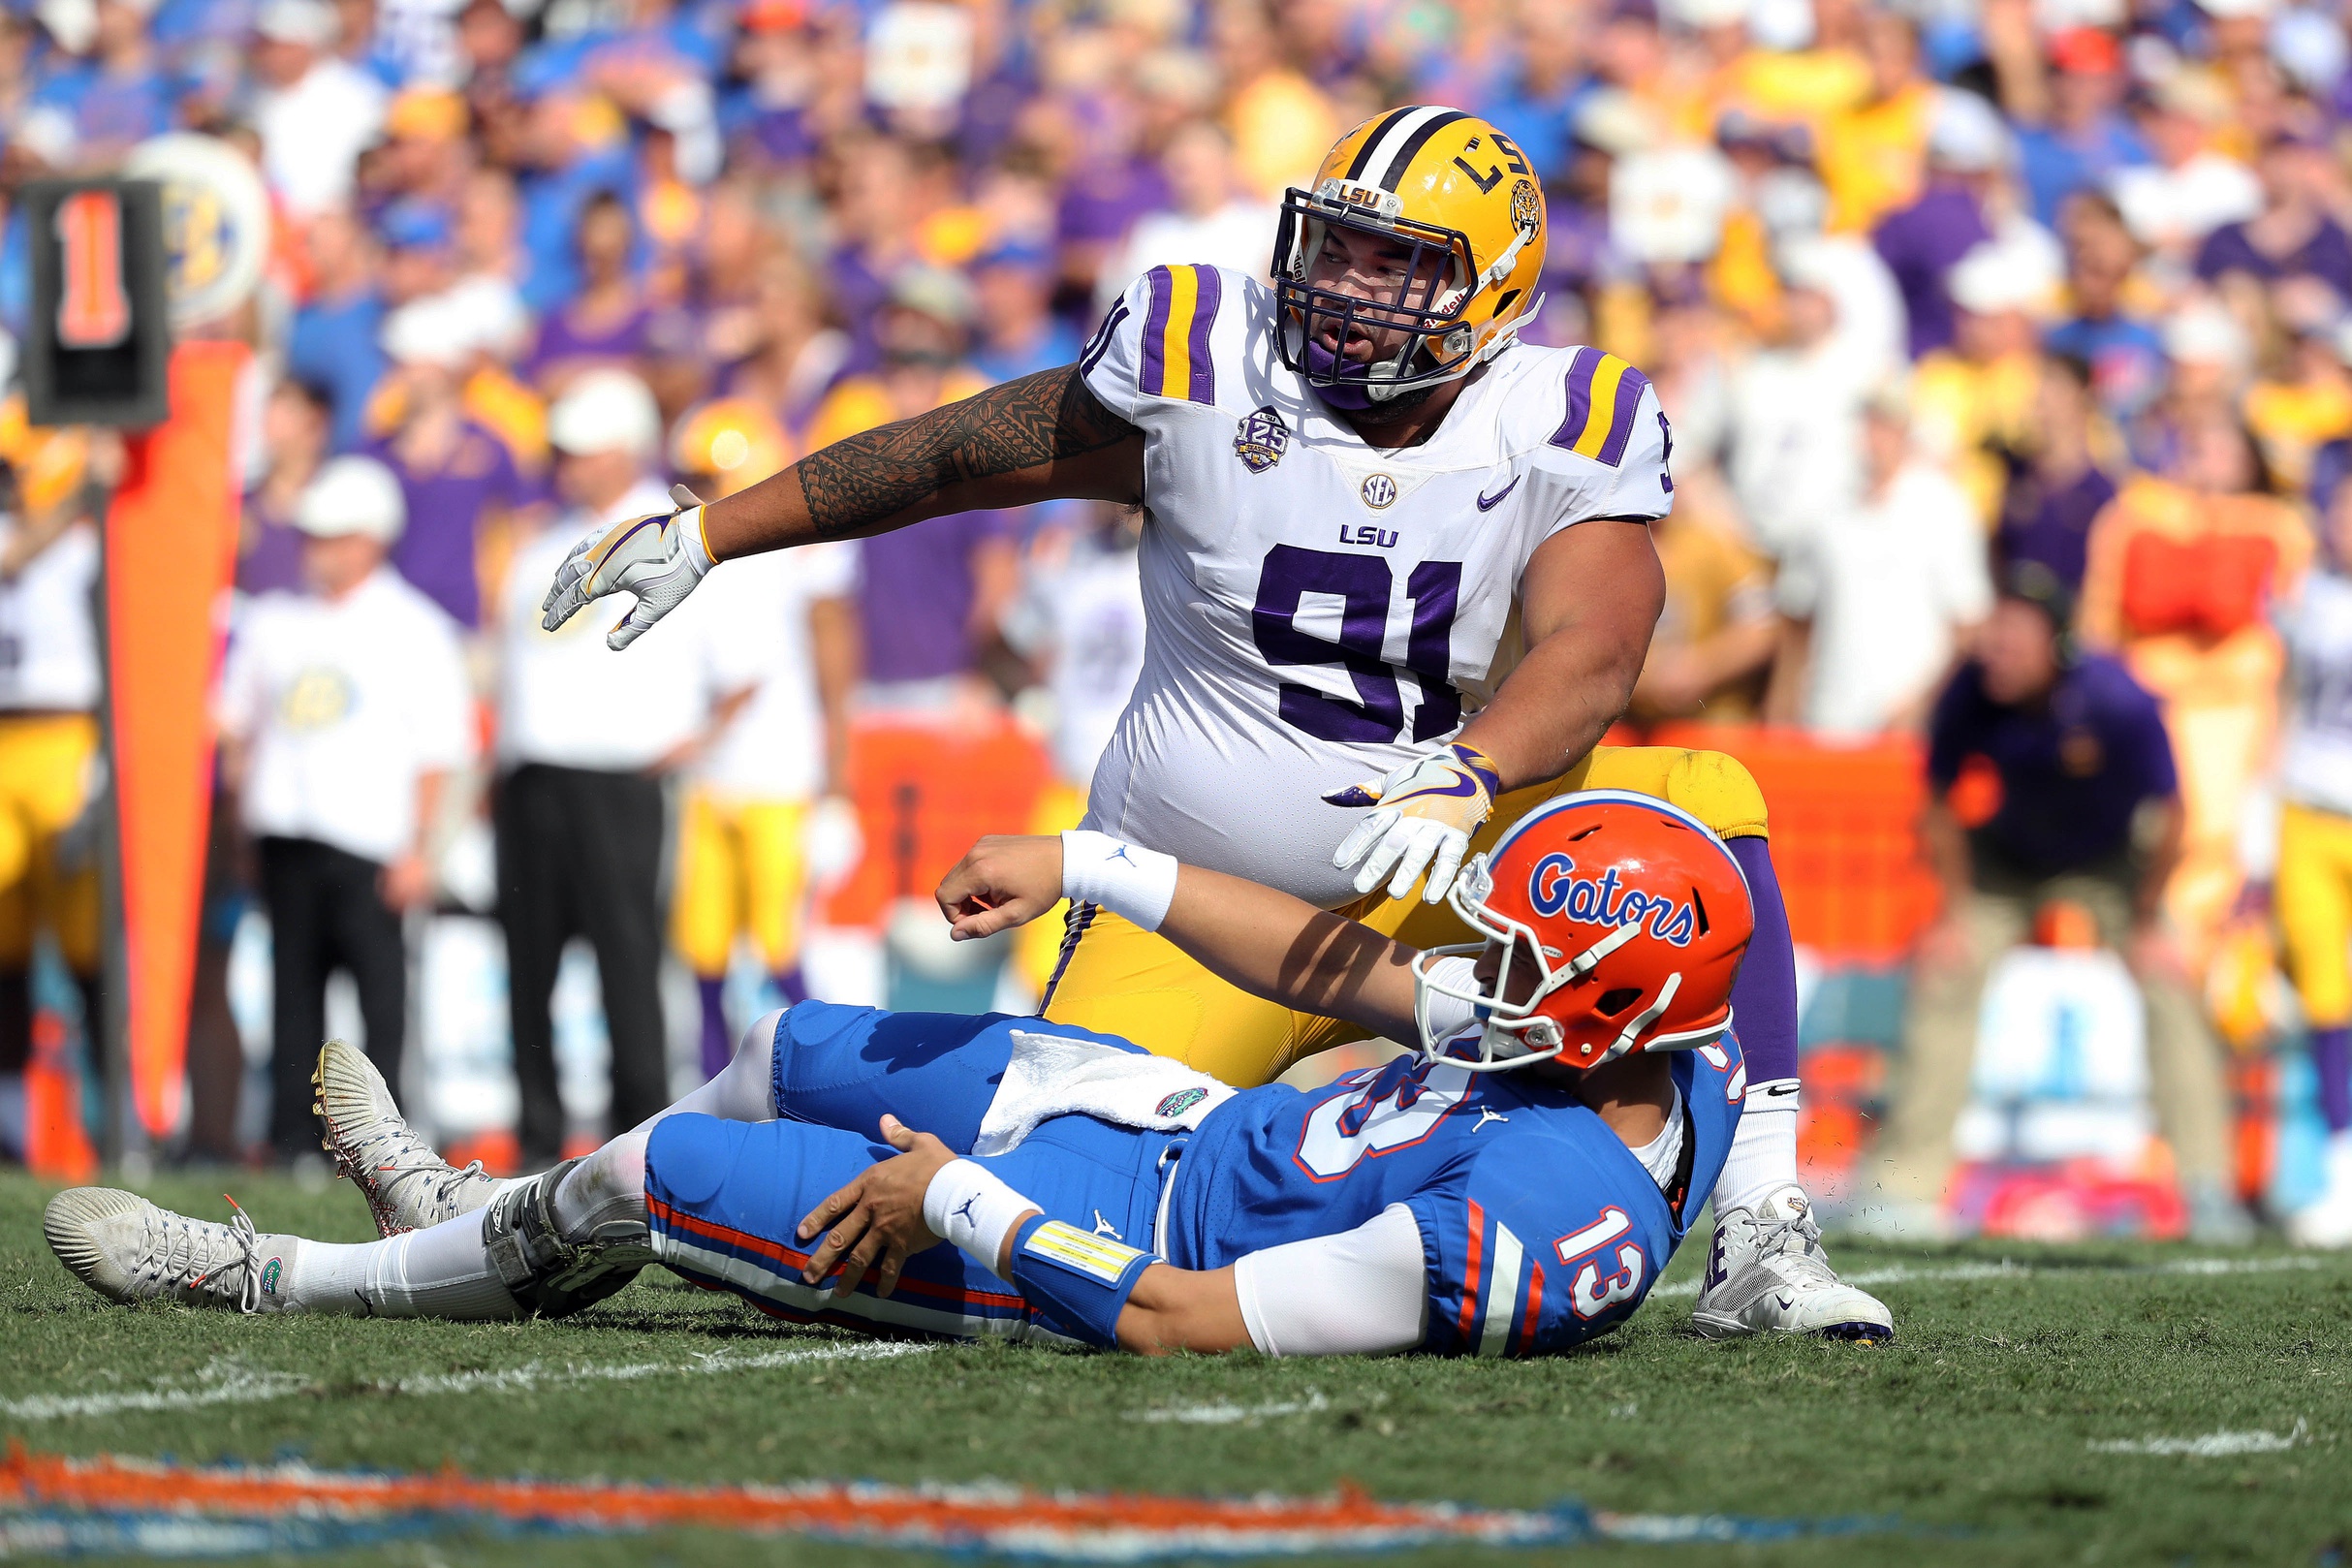 WATCH: LSU's Breiden Fehoko doing the Haka with his dad will pump you up